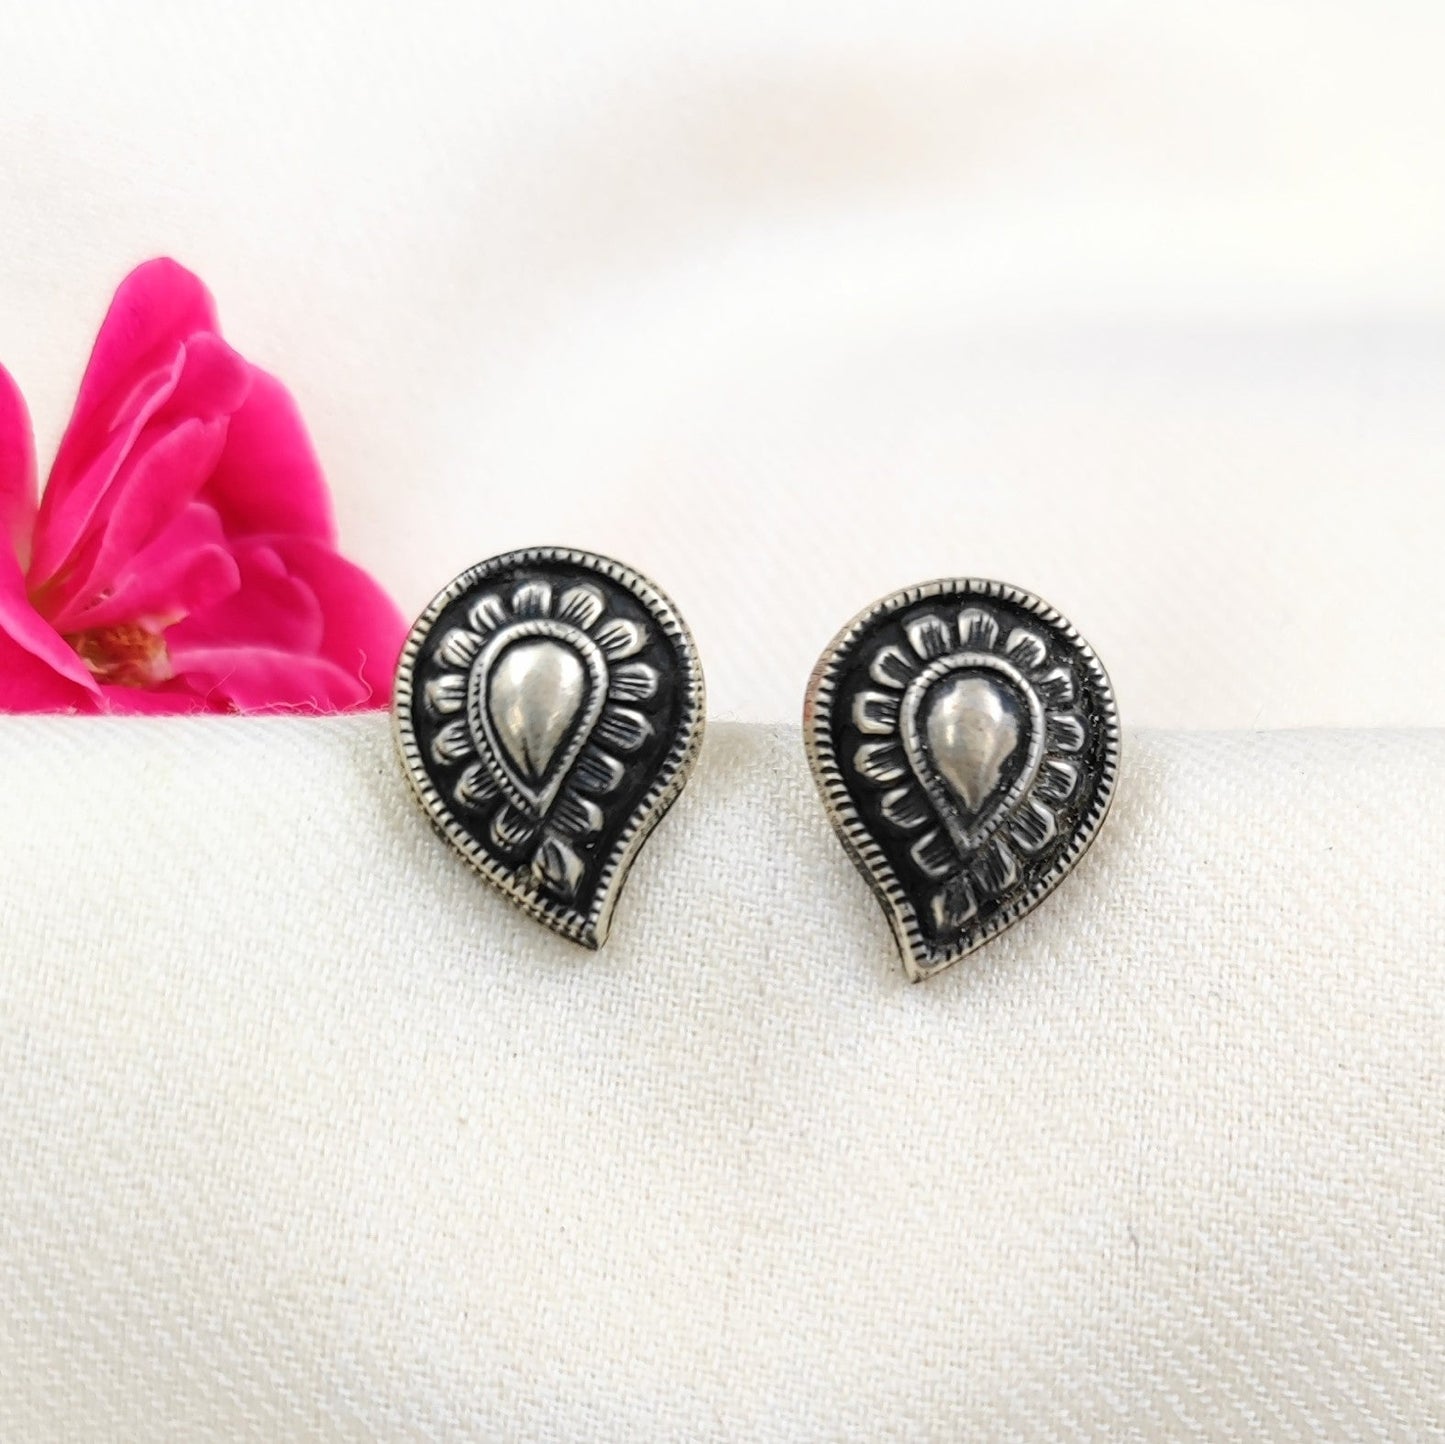 Silver Jewelry Earrings by Jauhri 92.5 Silver - Aam Patra Studs